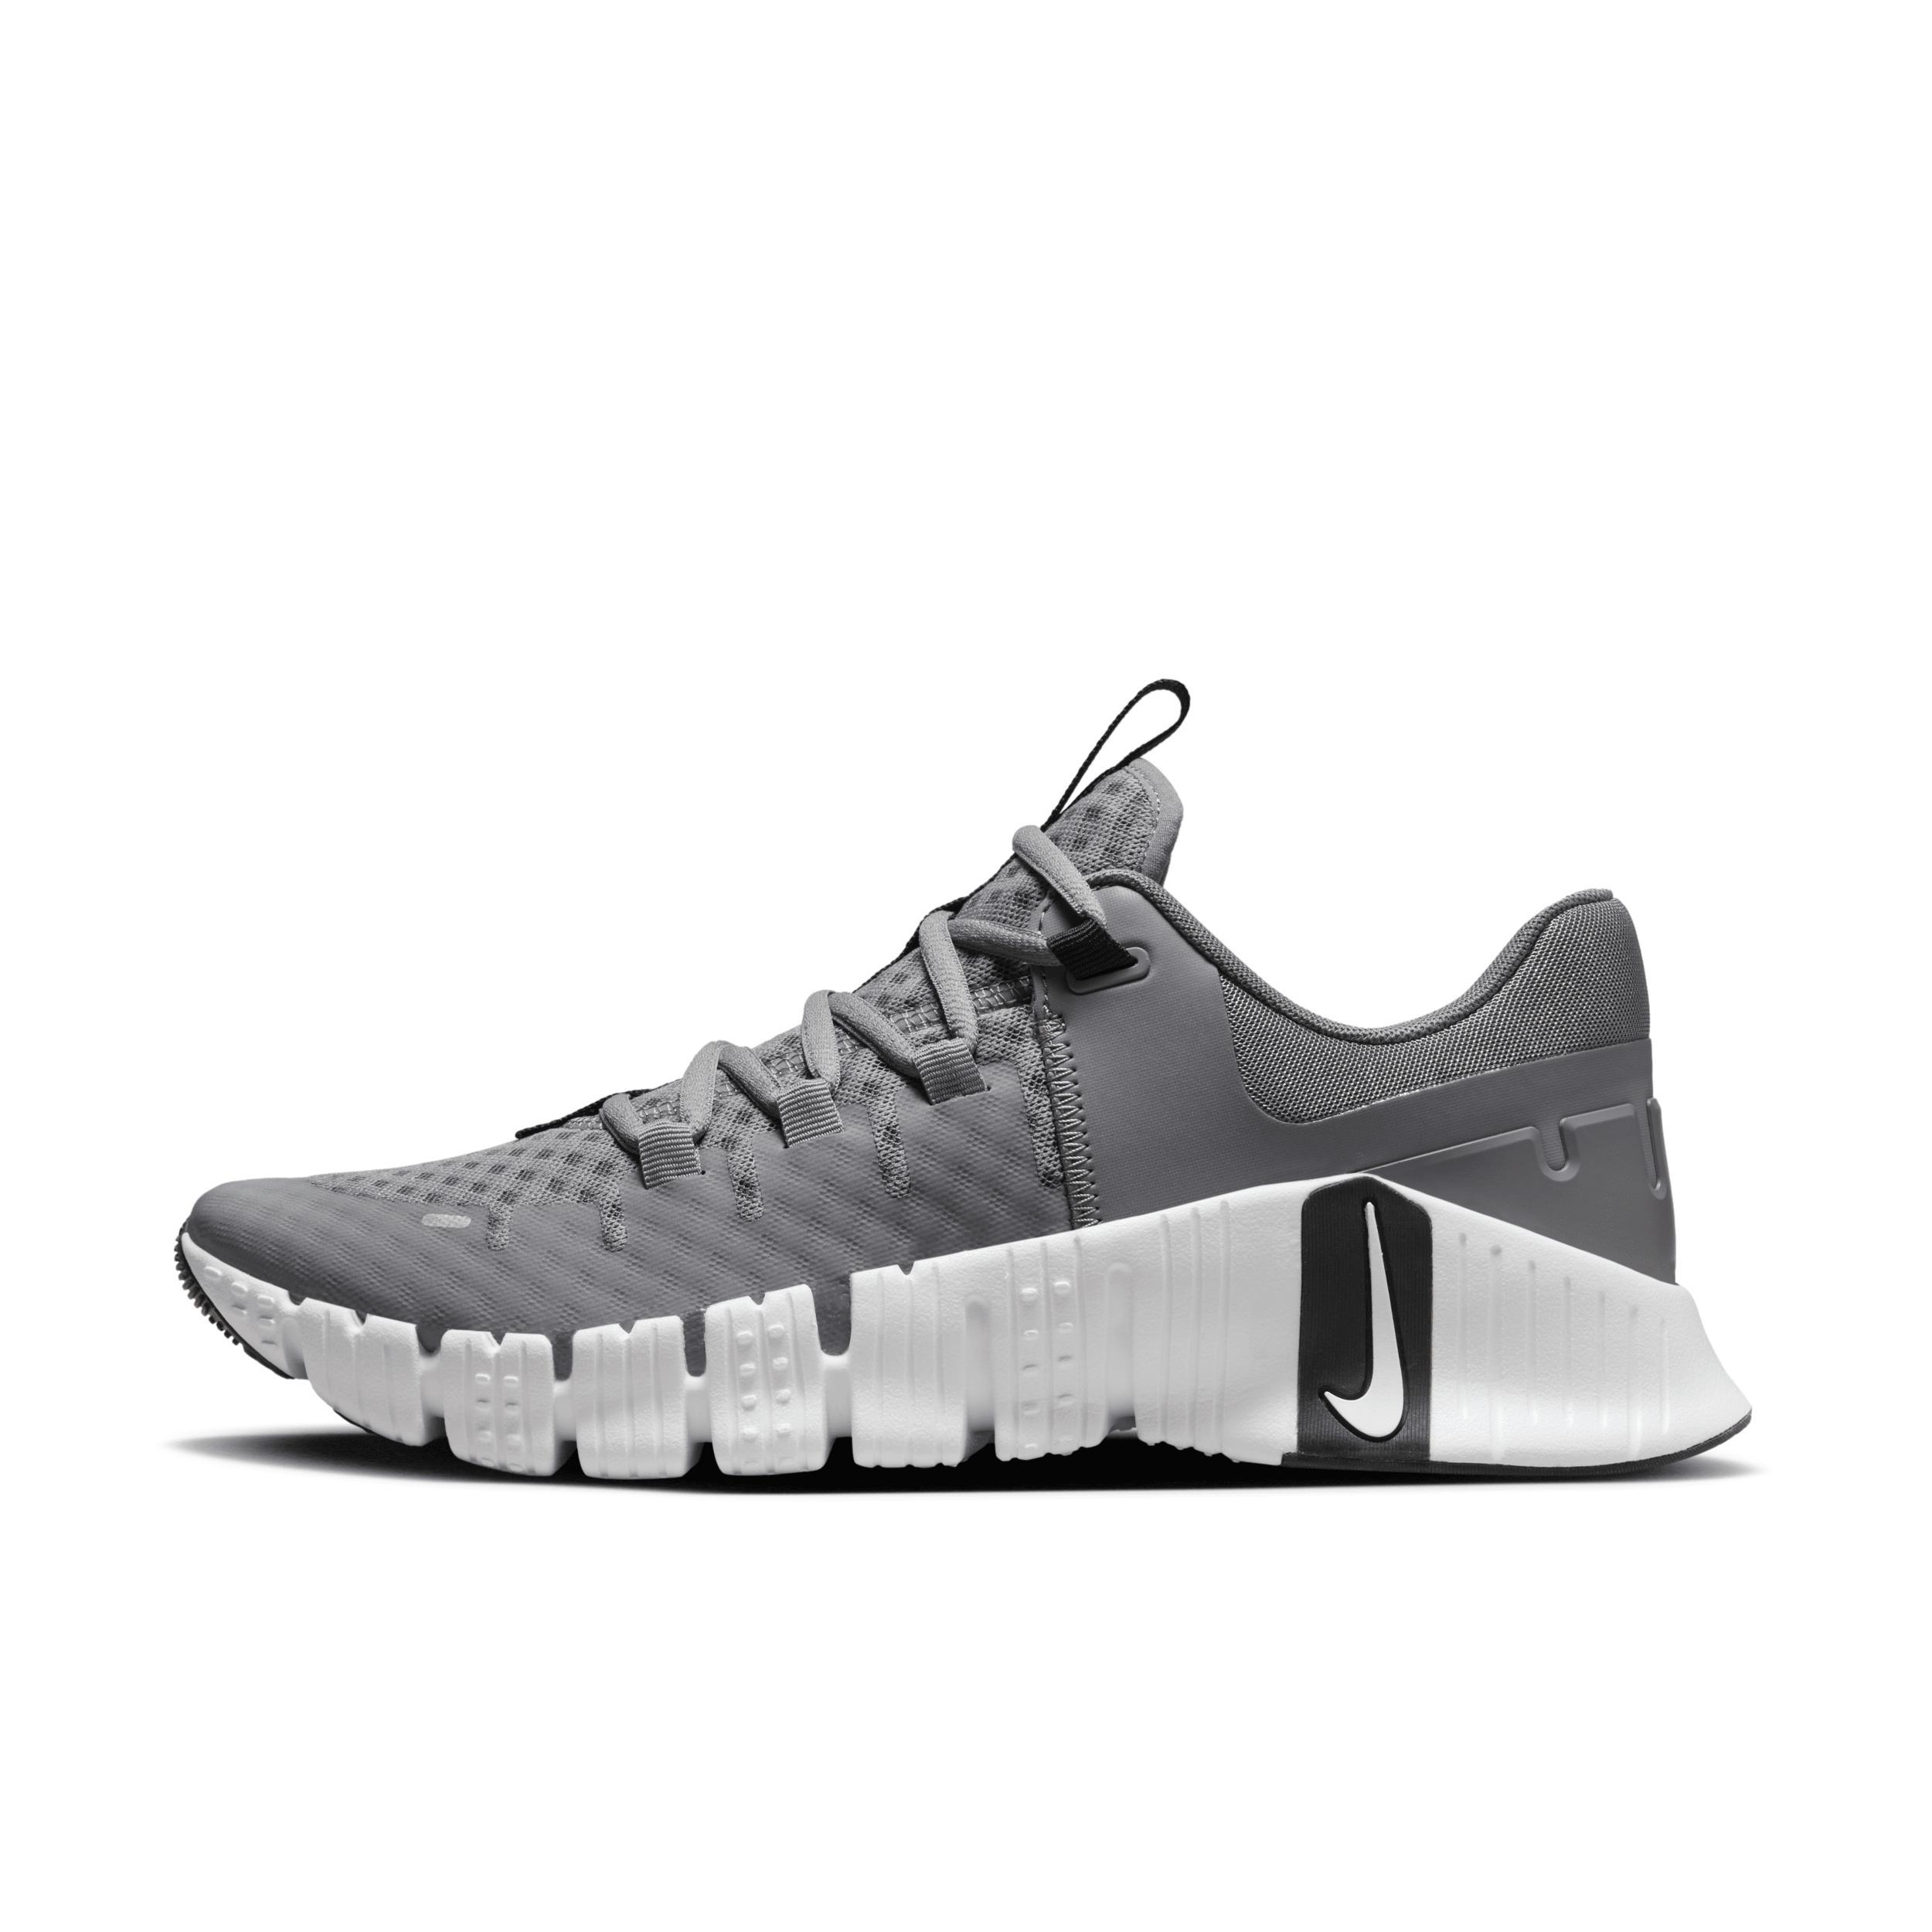 Nike Men's Free Metcon 5 (Team) Workout Shoes Product Image